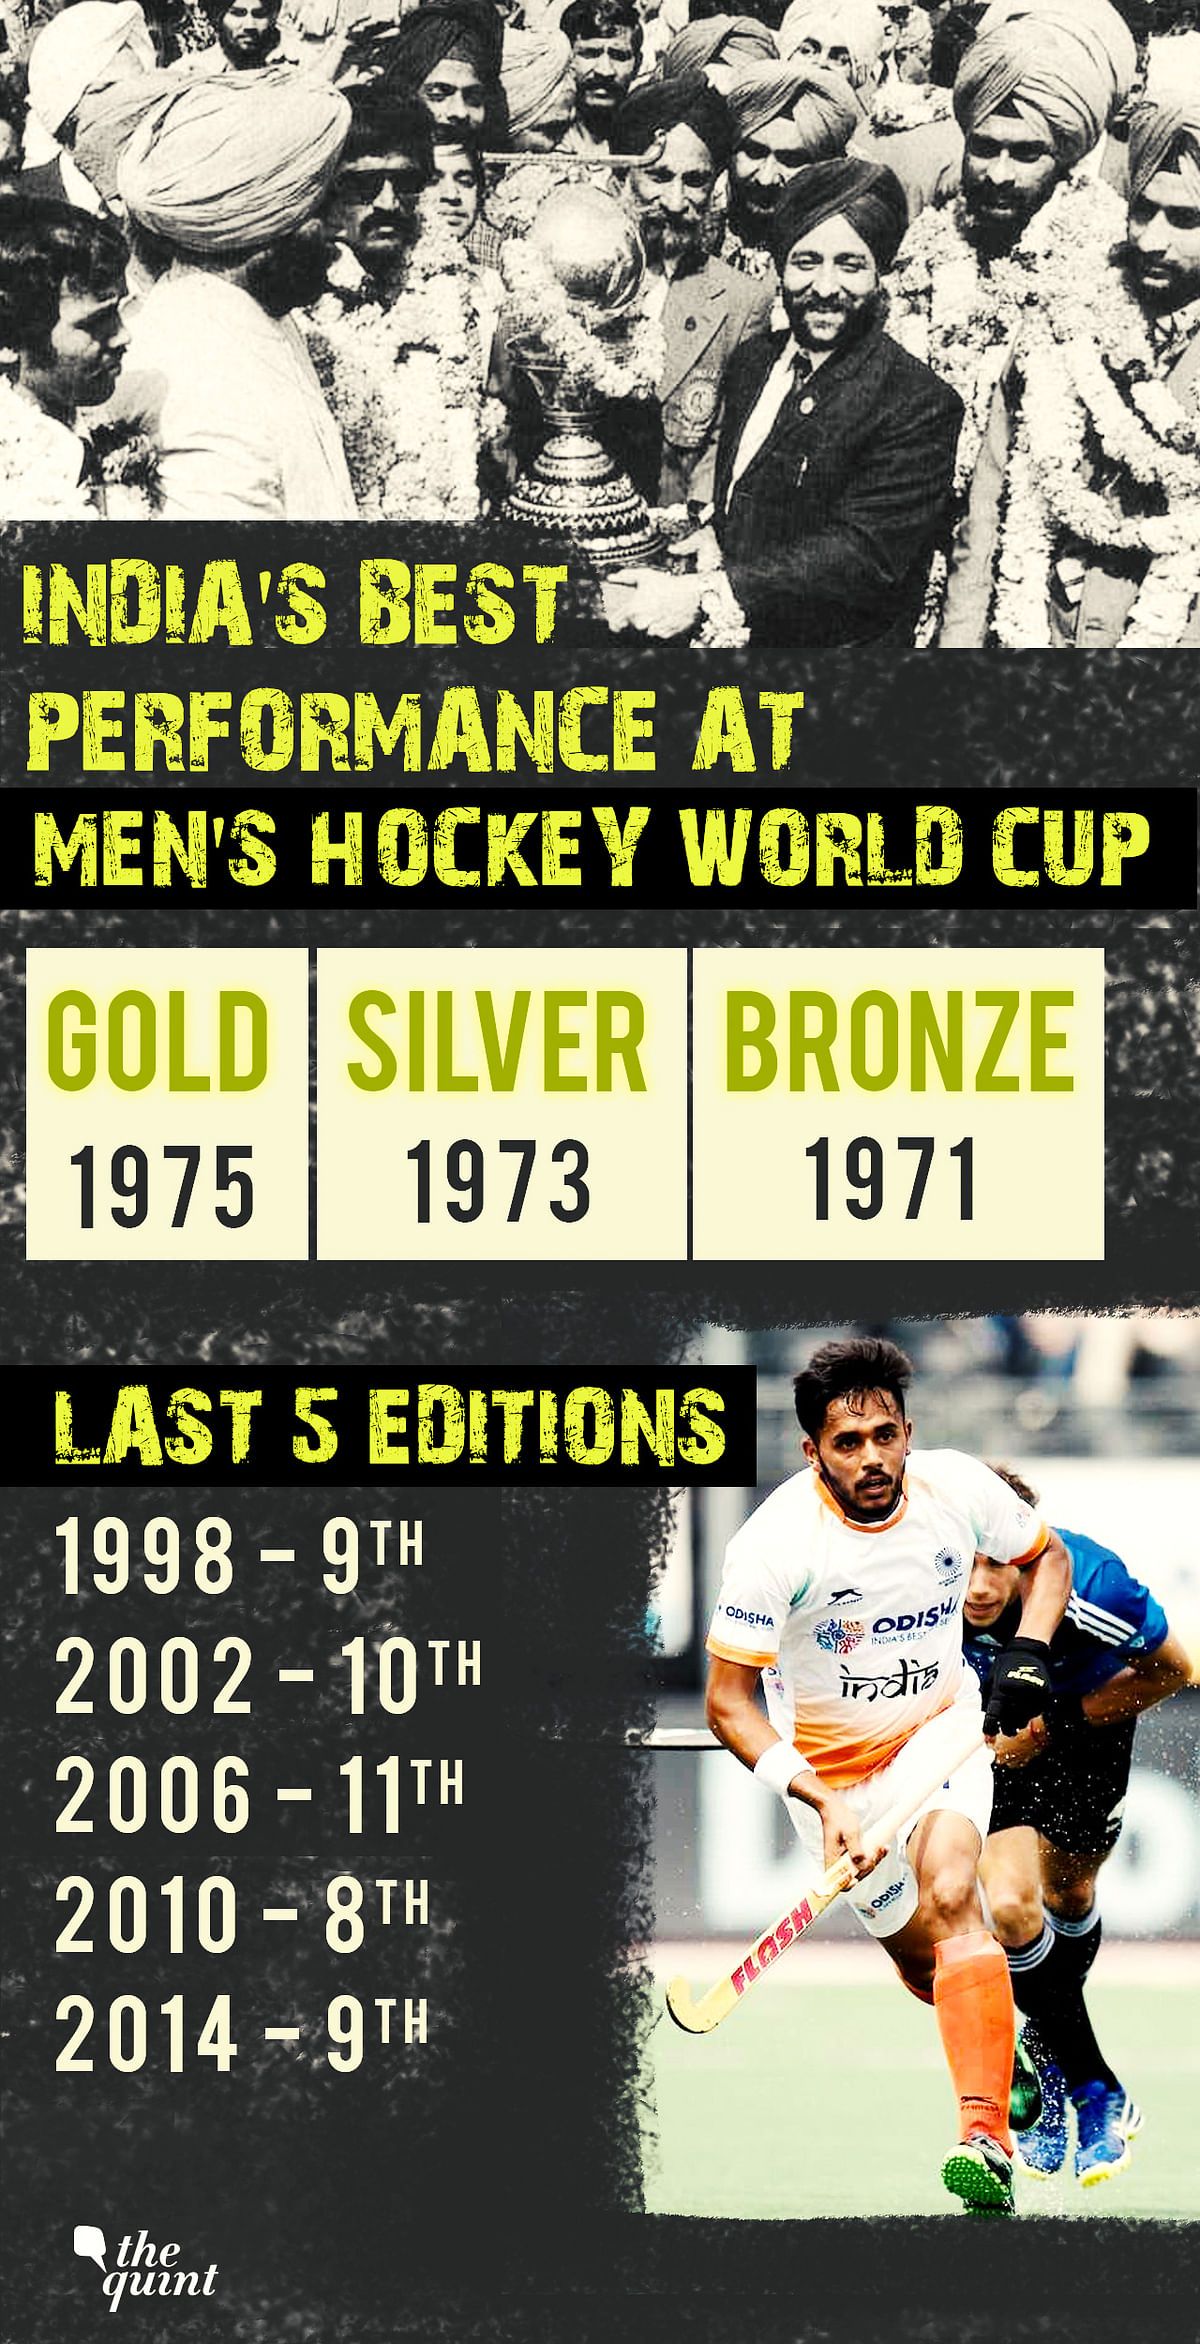 The 1975 edition is the first, and only time that the Indian men’s hockey team won the World Cup title. 